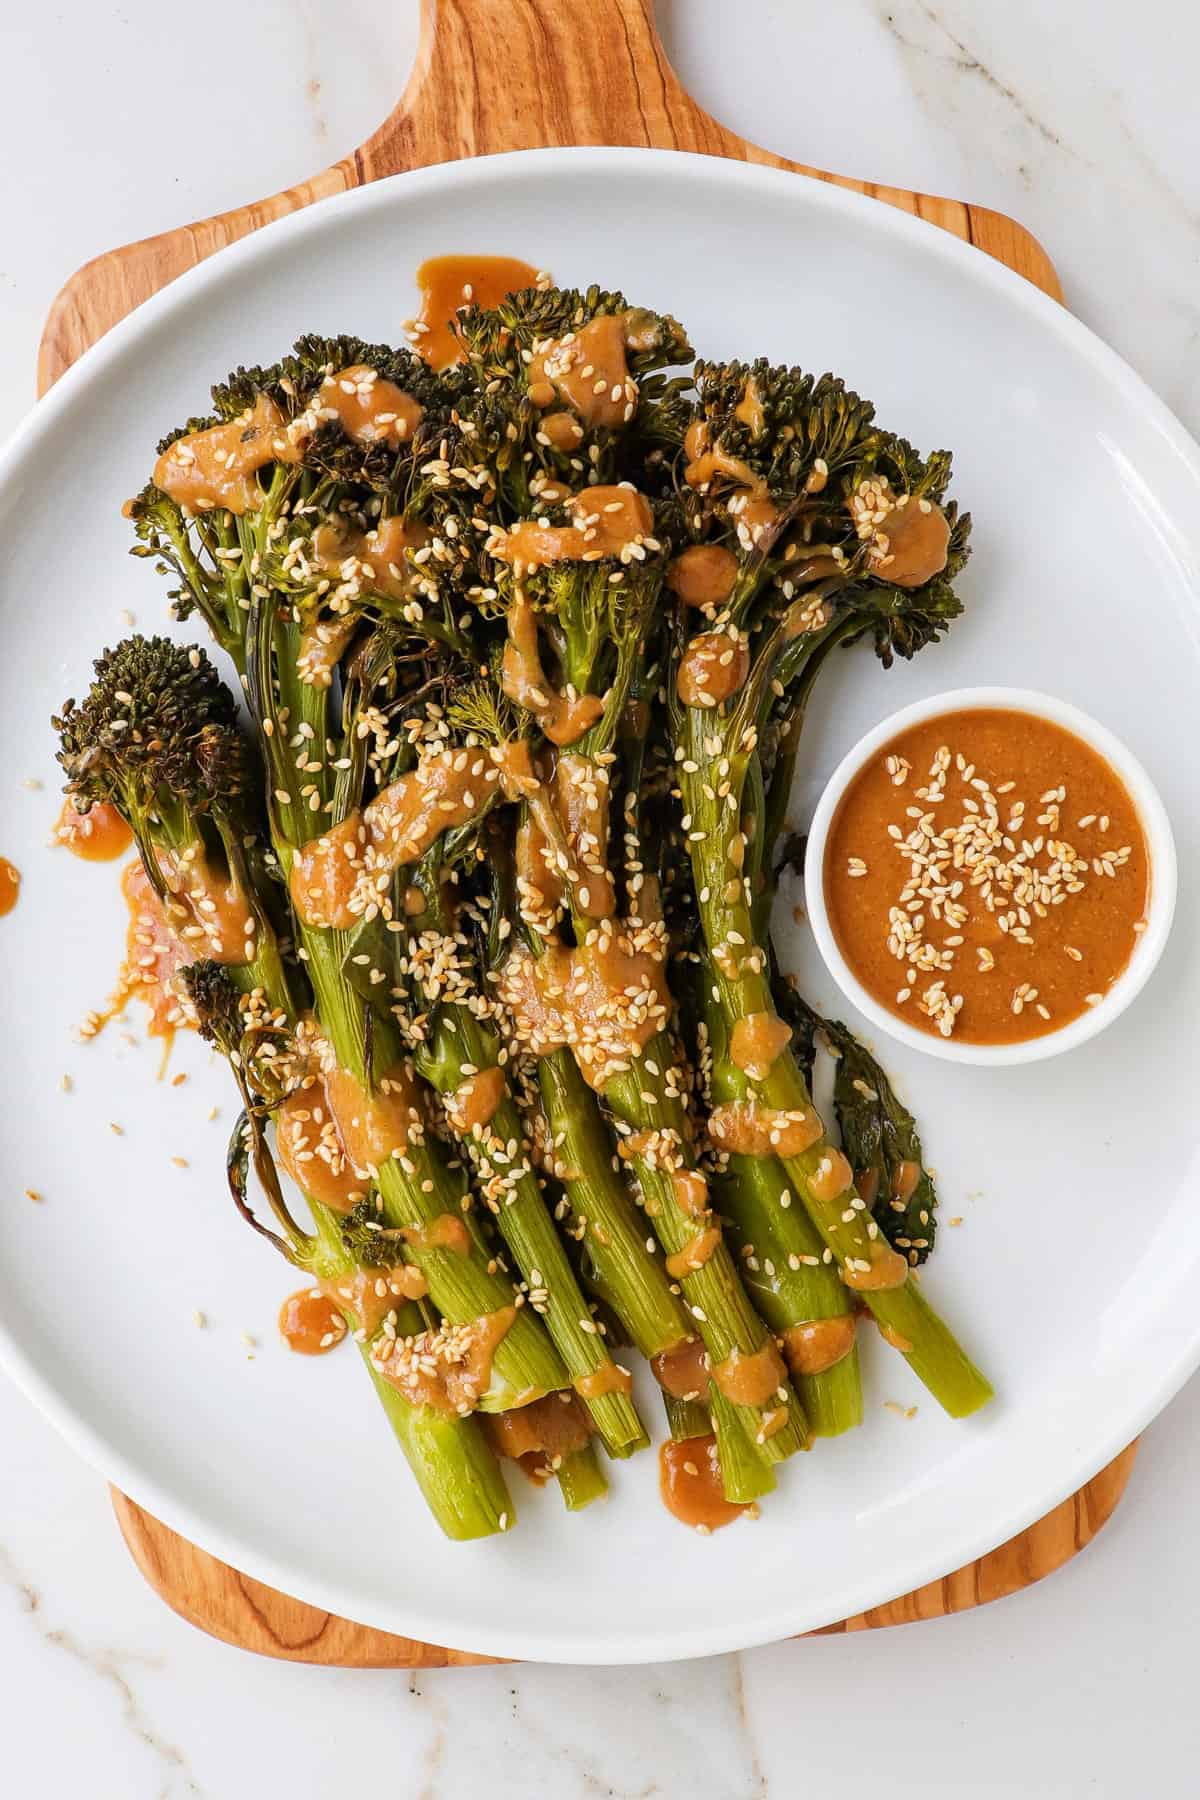 Tenderstem broccoli on a wooden board and plate with miso sauce drizzled on top